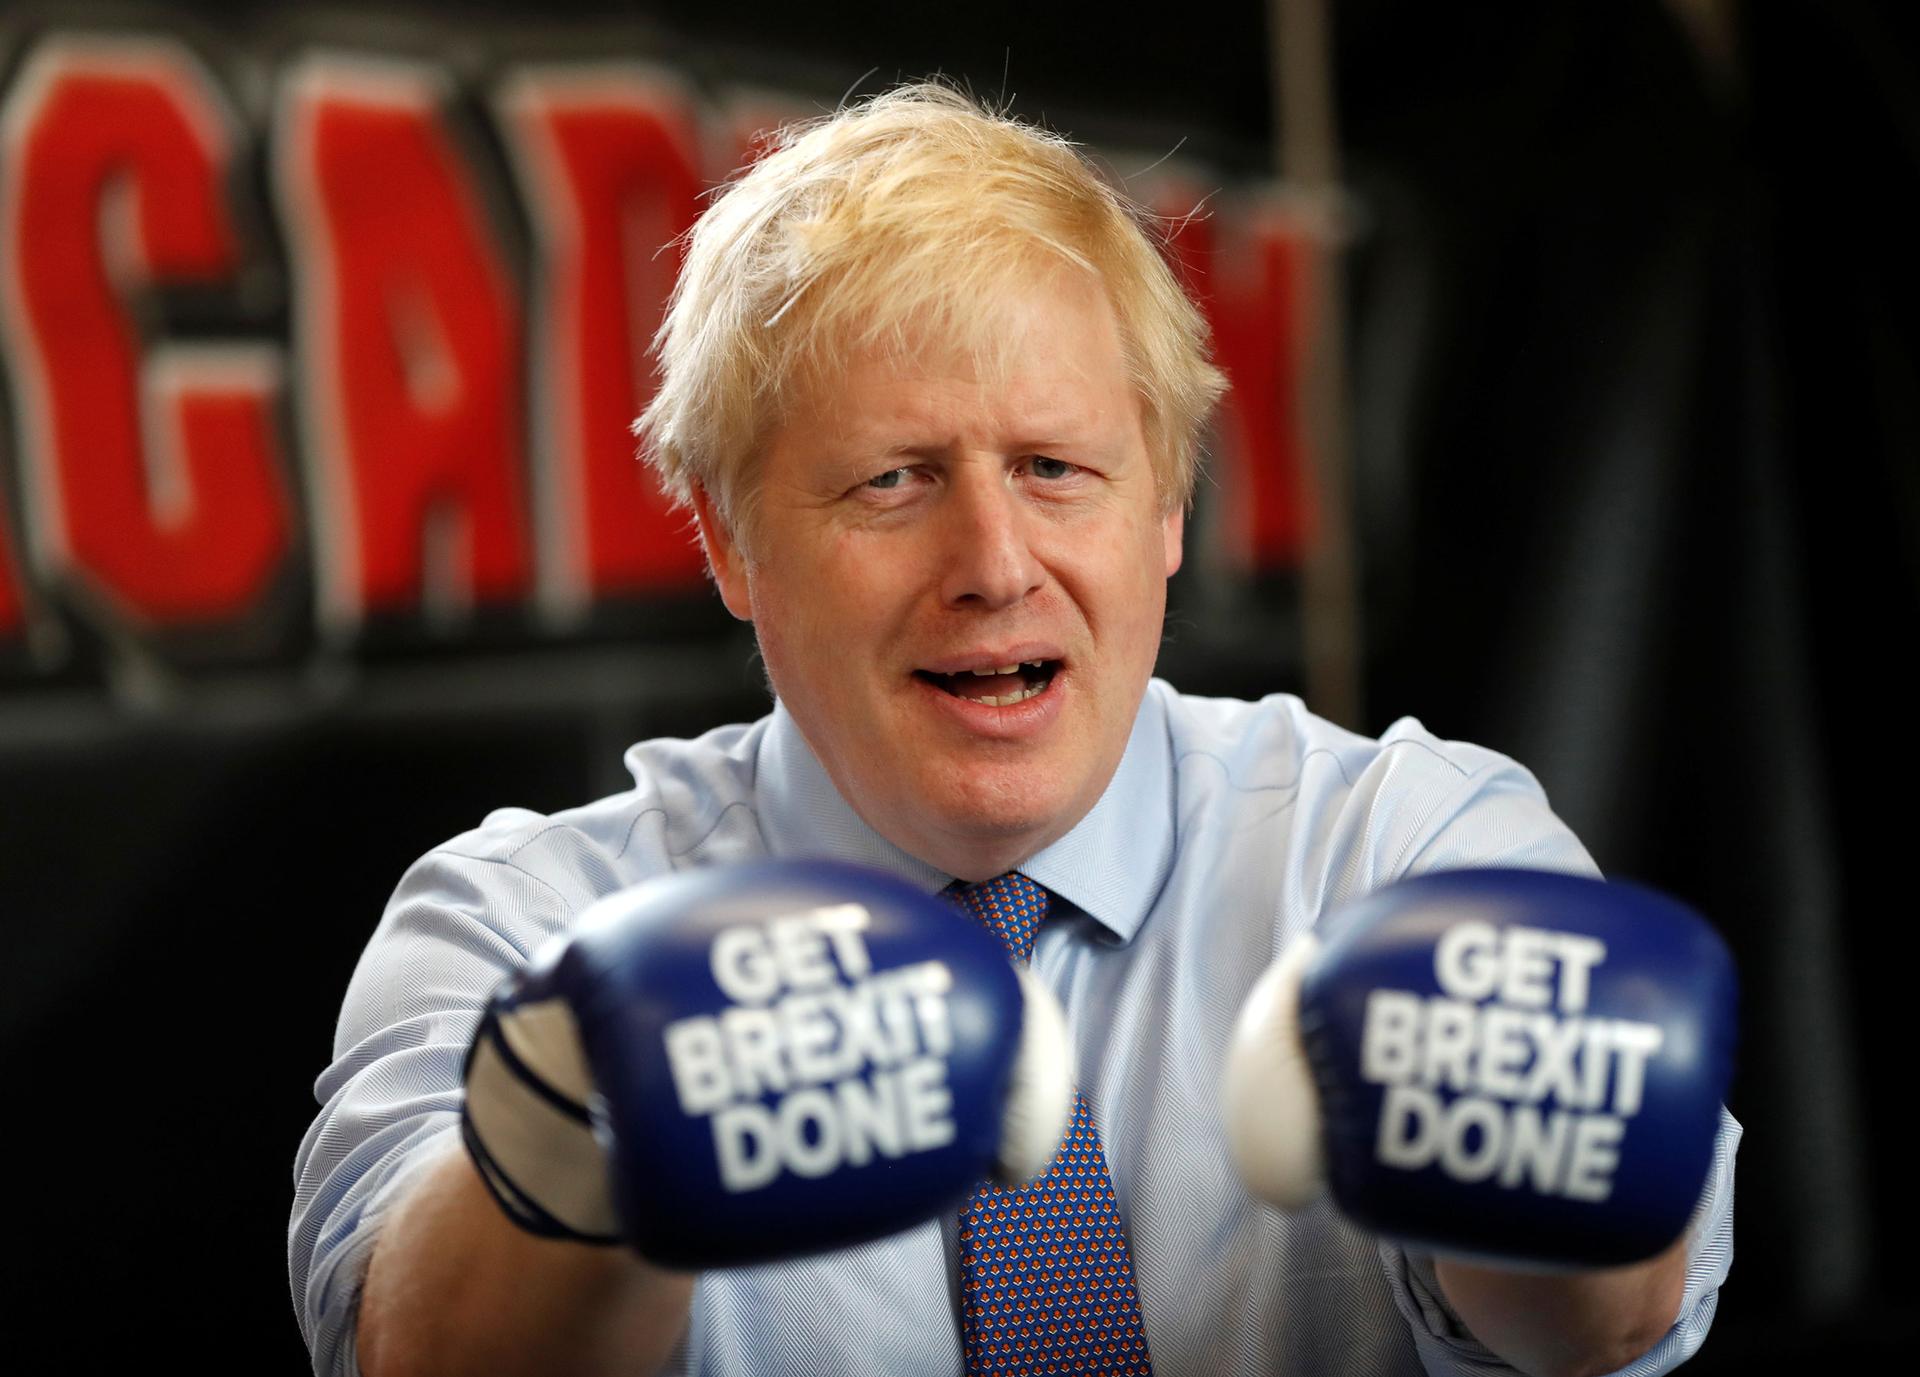 Britain's Prime Minister Boris Johnson is shown wearing blue boxing gloves with the words 